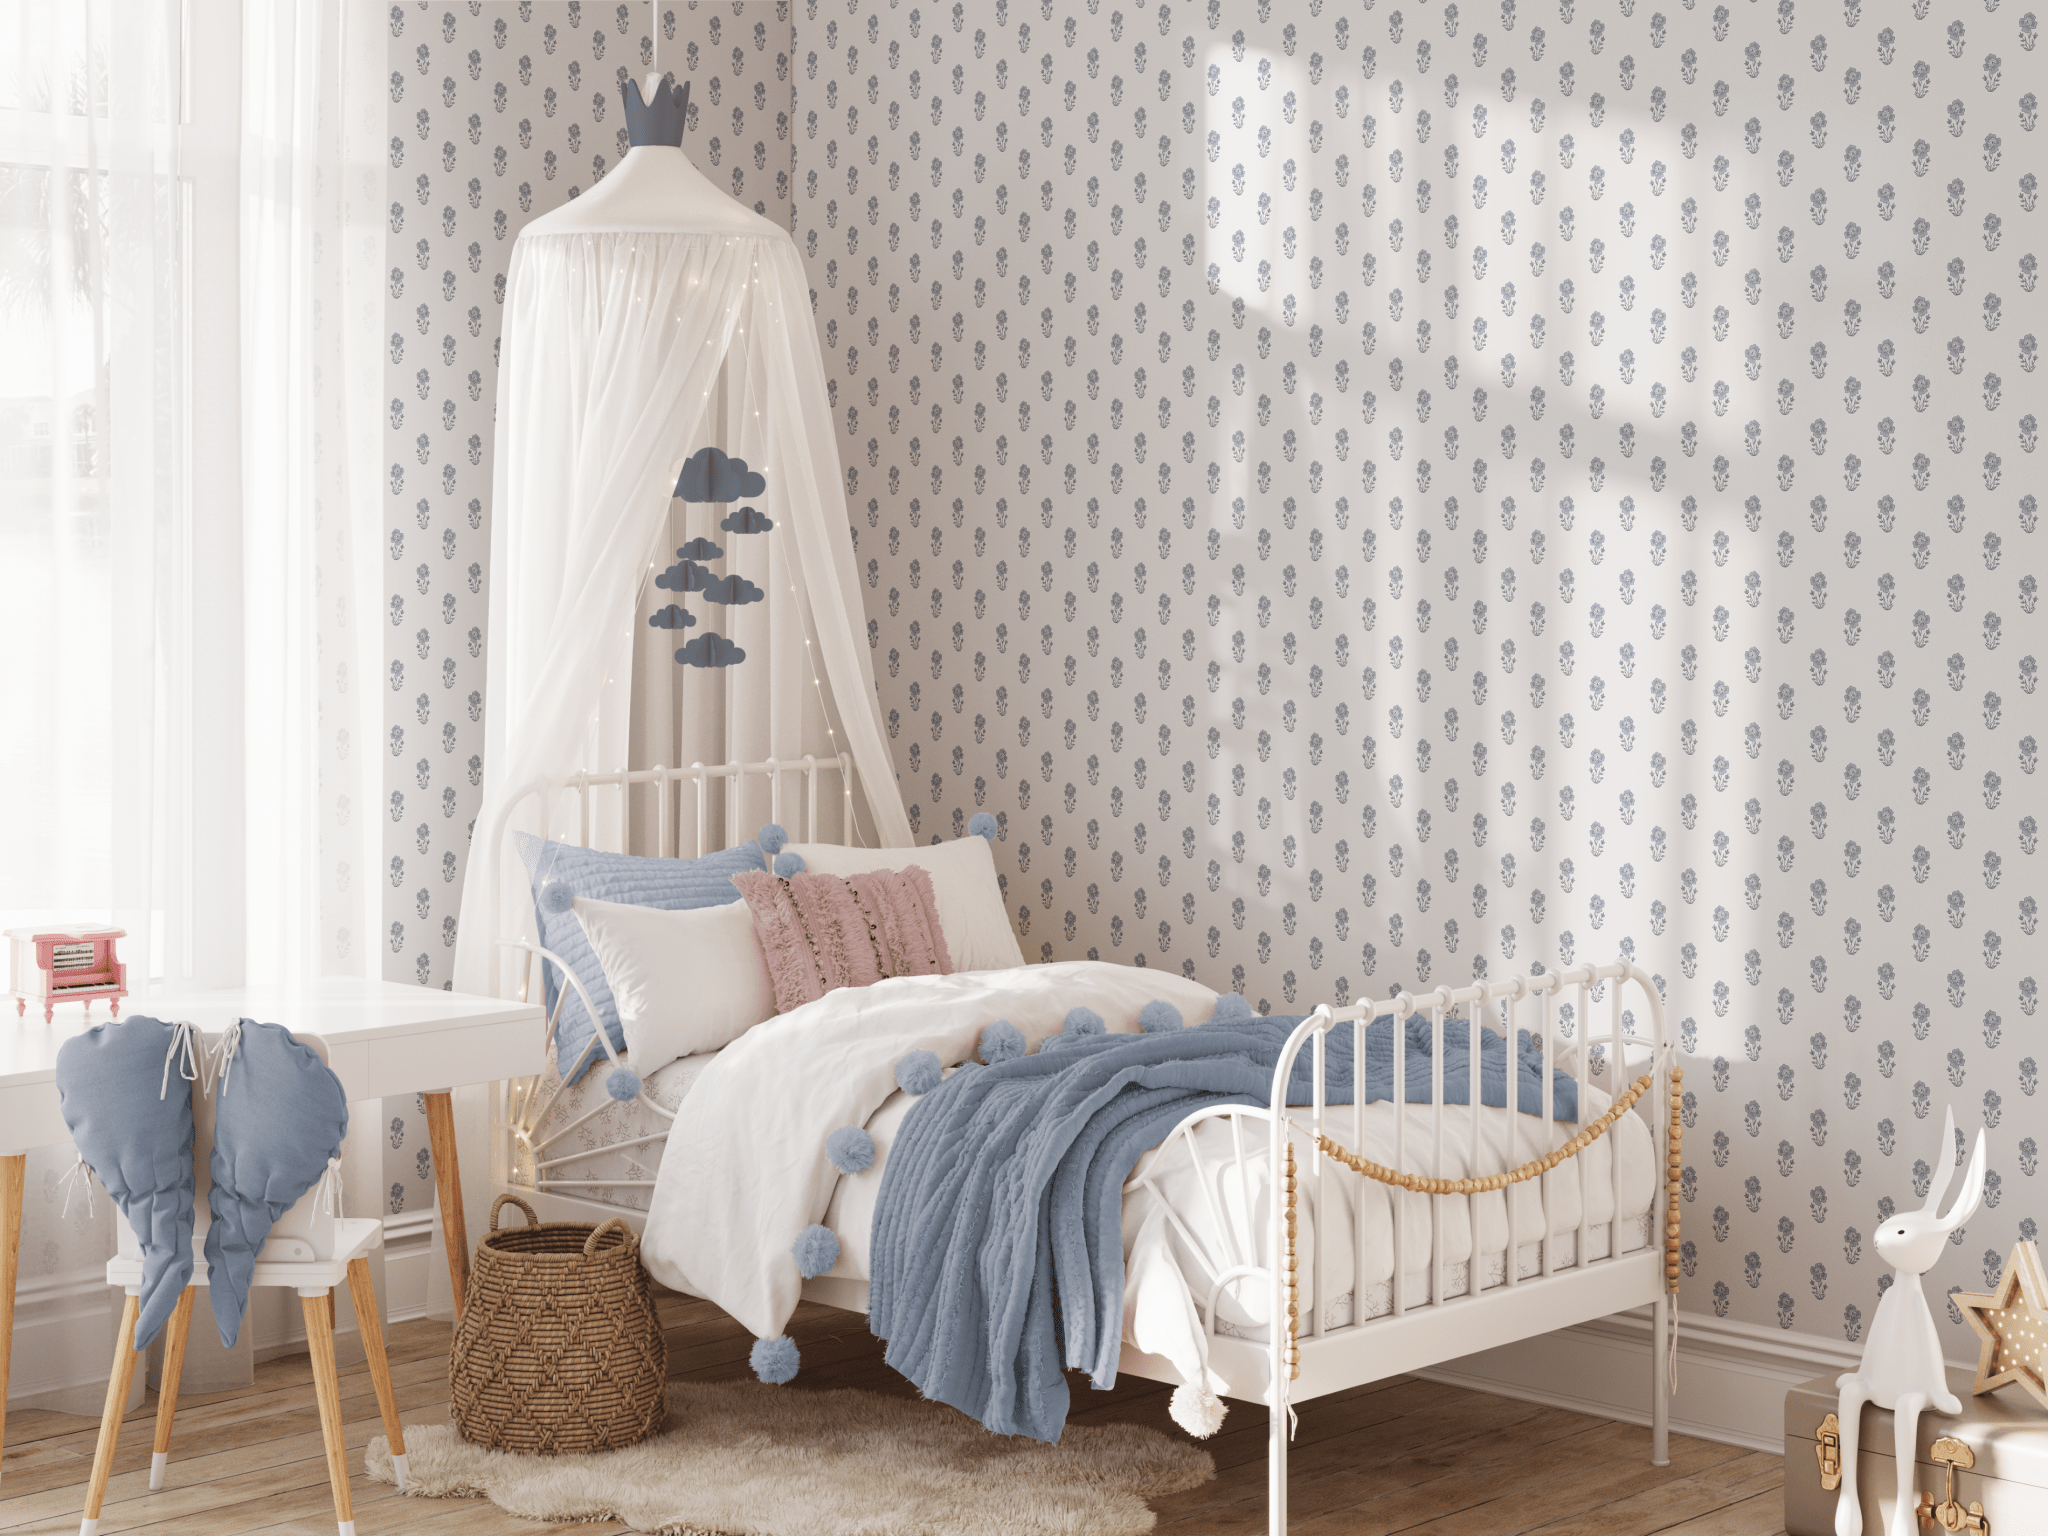 A child's bedroom featuring high-quality wallpaper with a hydrangea pattern. There's a white bed with a canopy, blue accents, and playful decor.